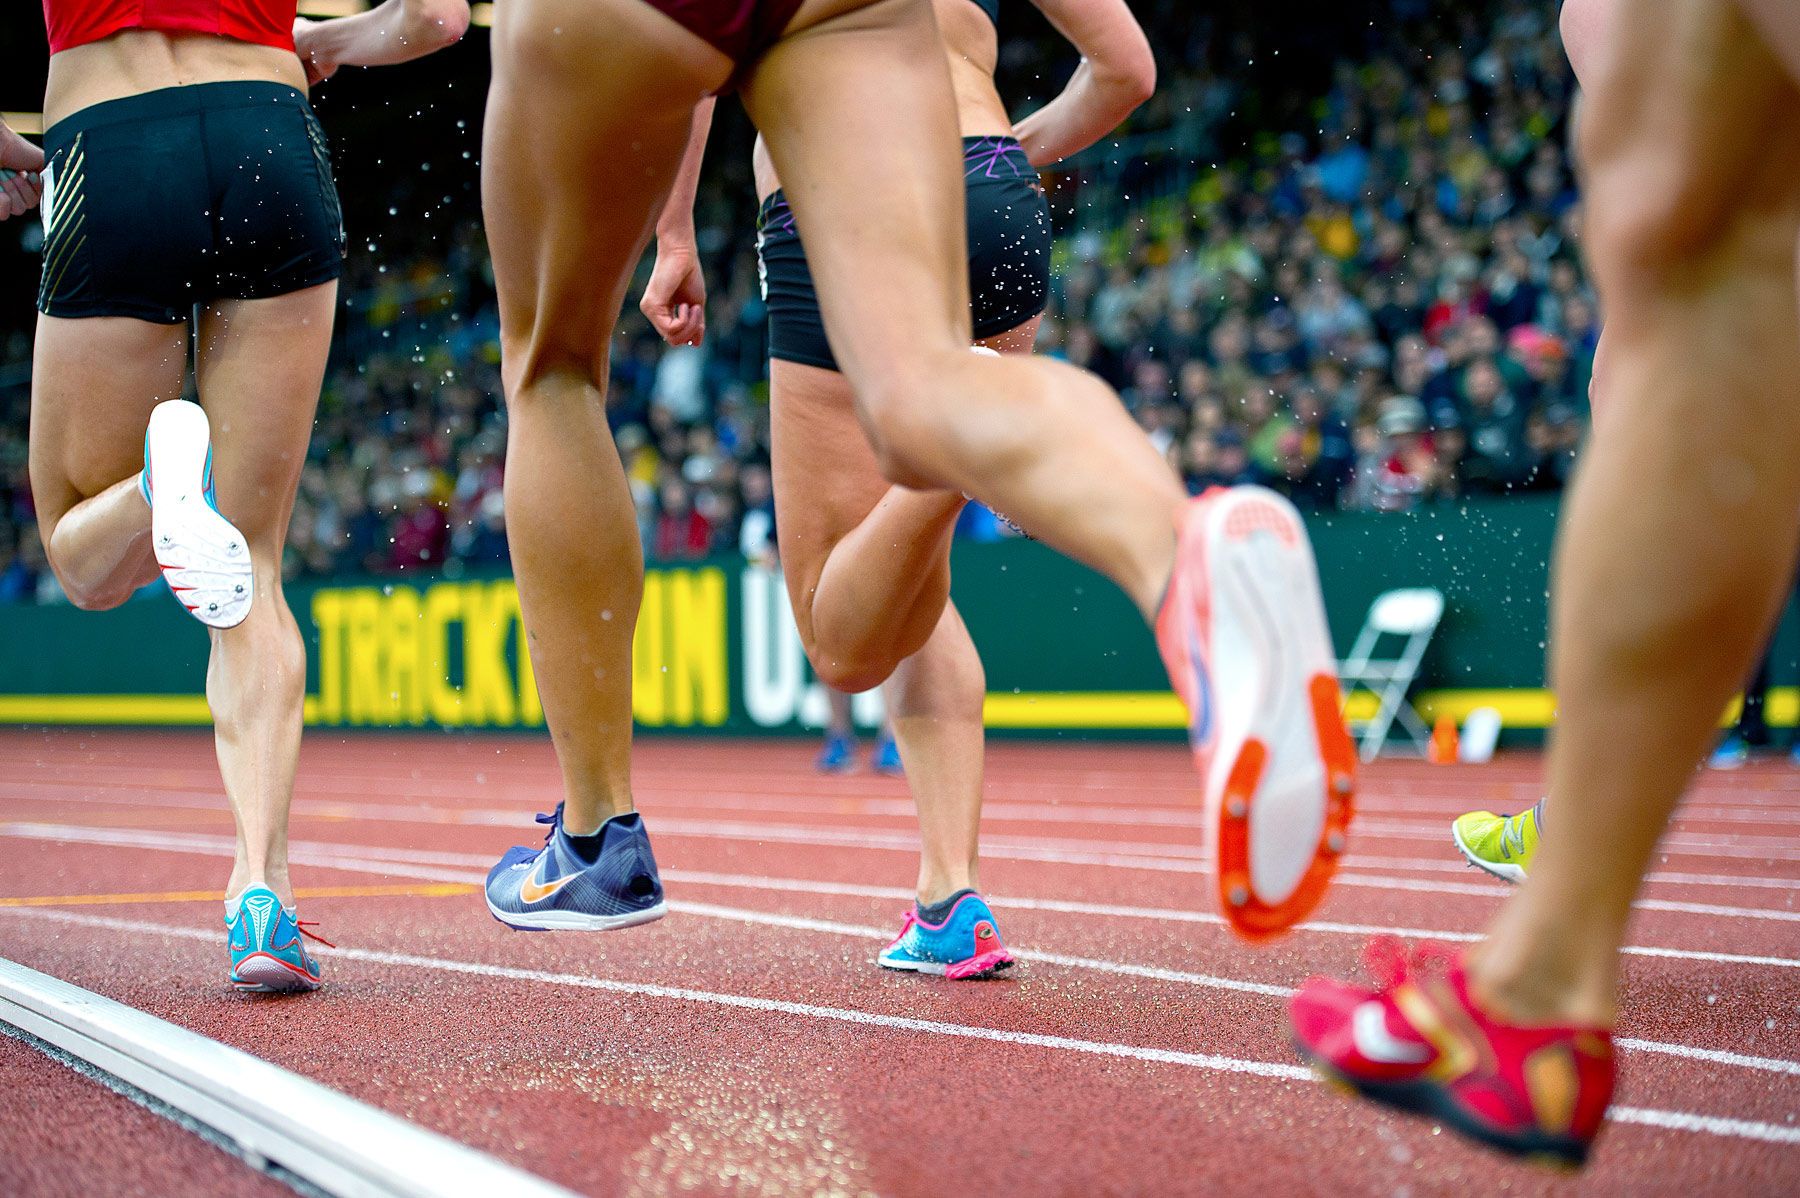 1ustrials_2012_legs_track_and_field_image_jeff_cohen_photo_lb.jpg